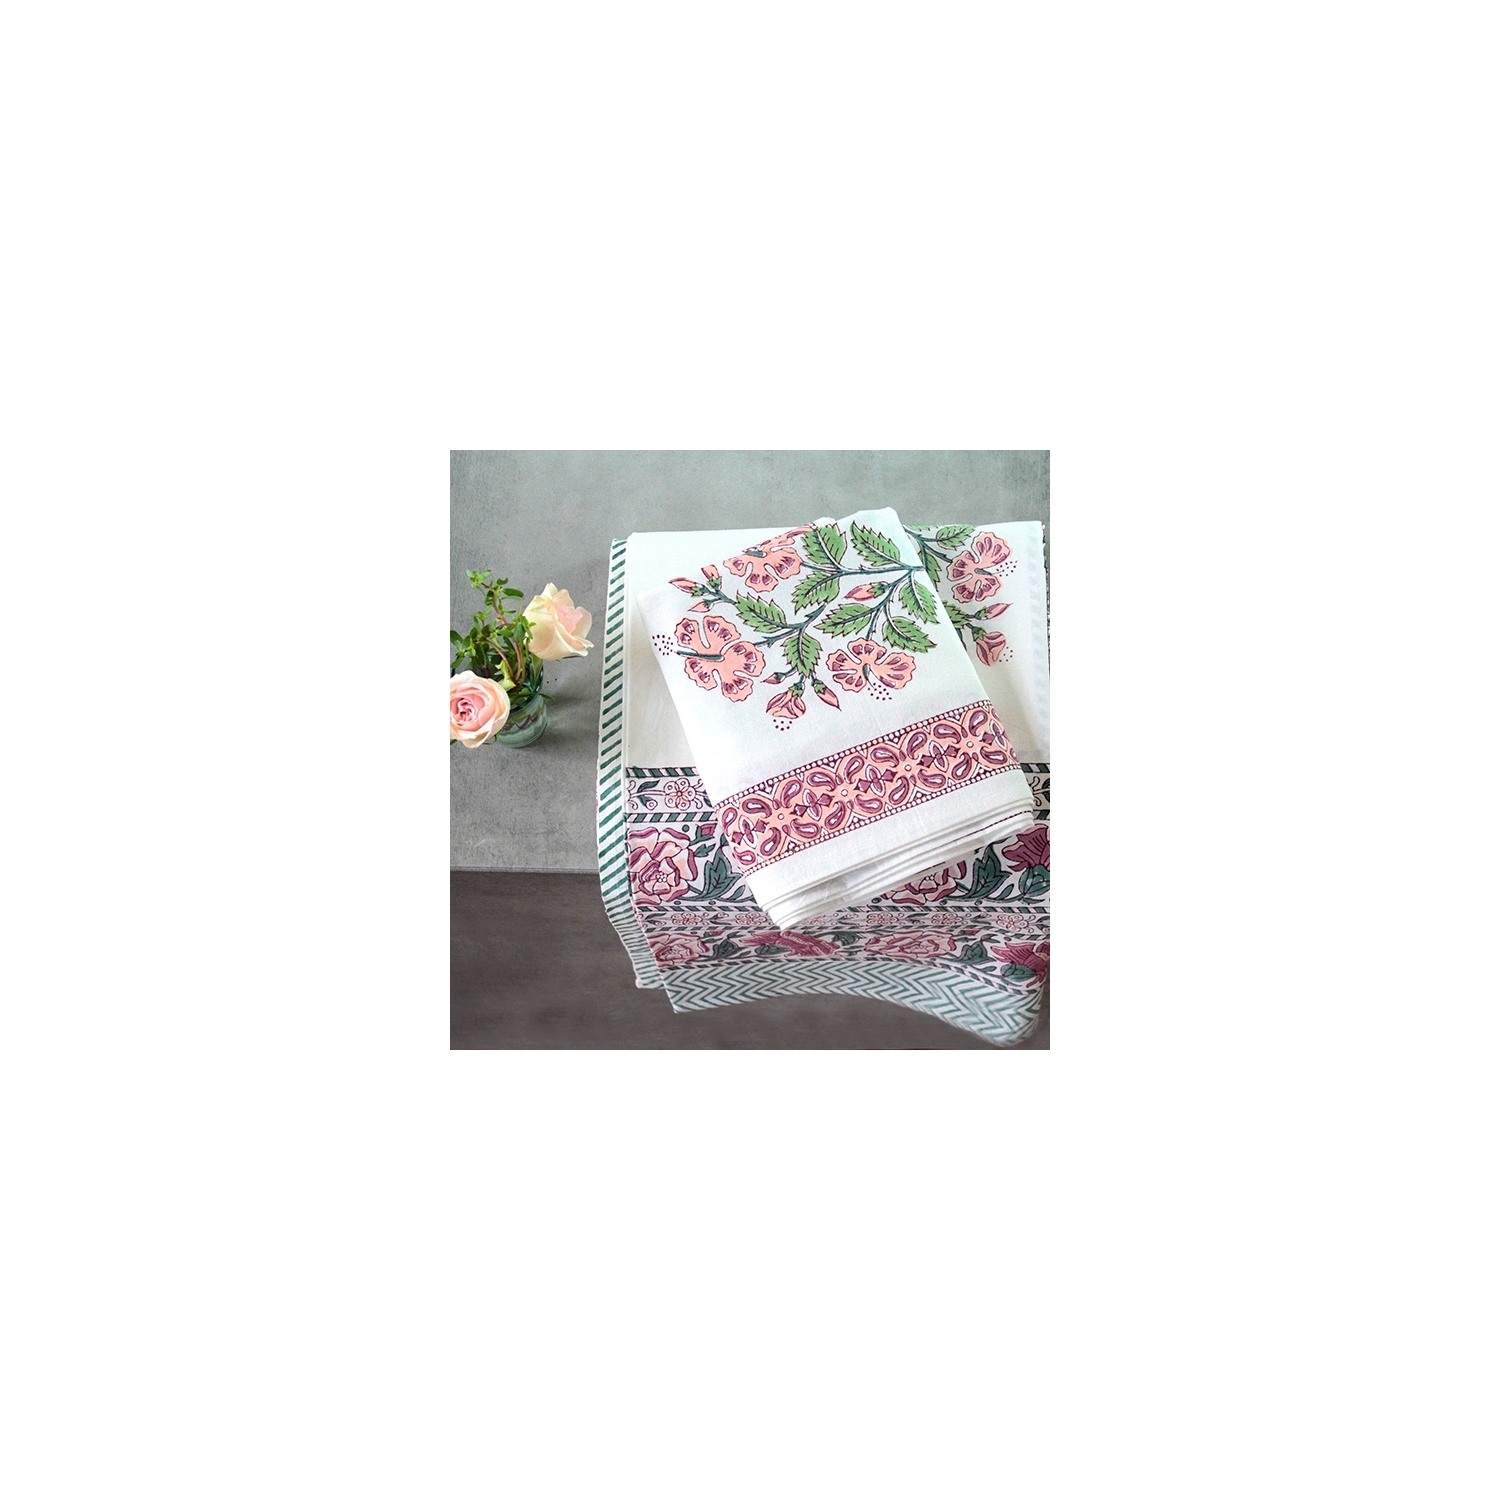 Indian printed bedsheet + pillow Green and white